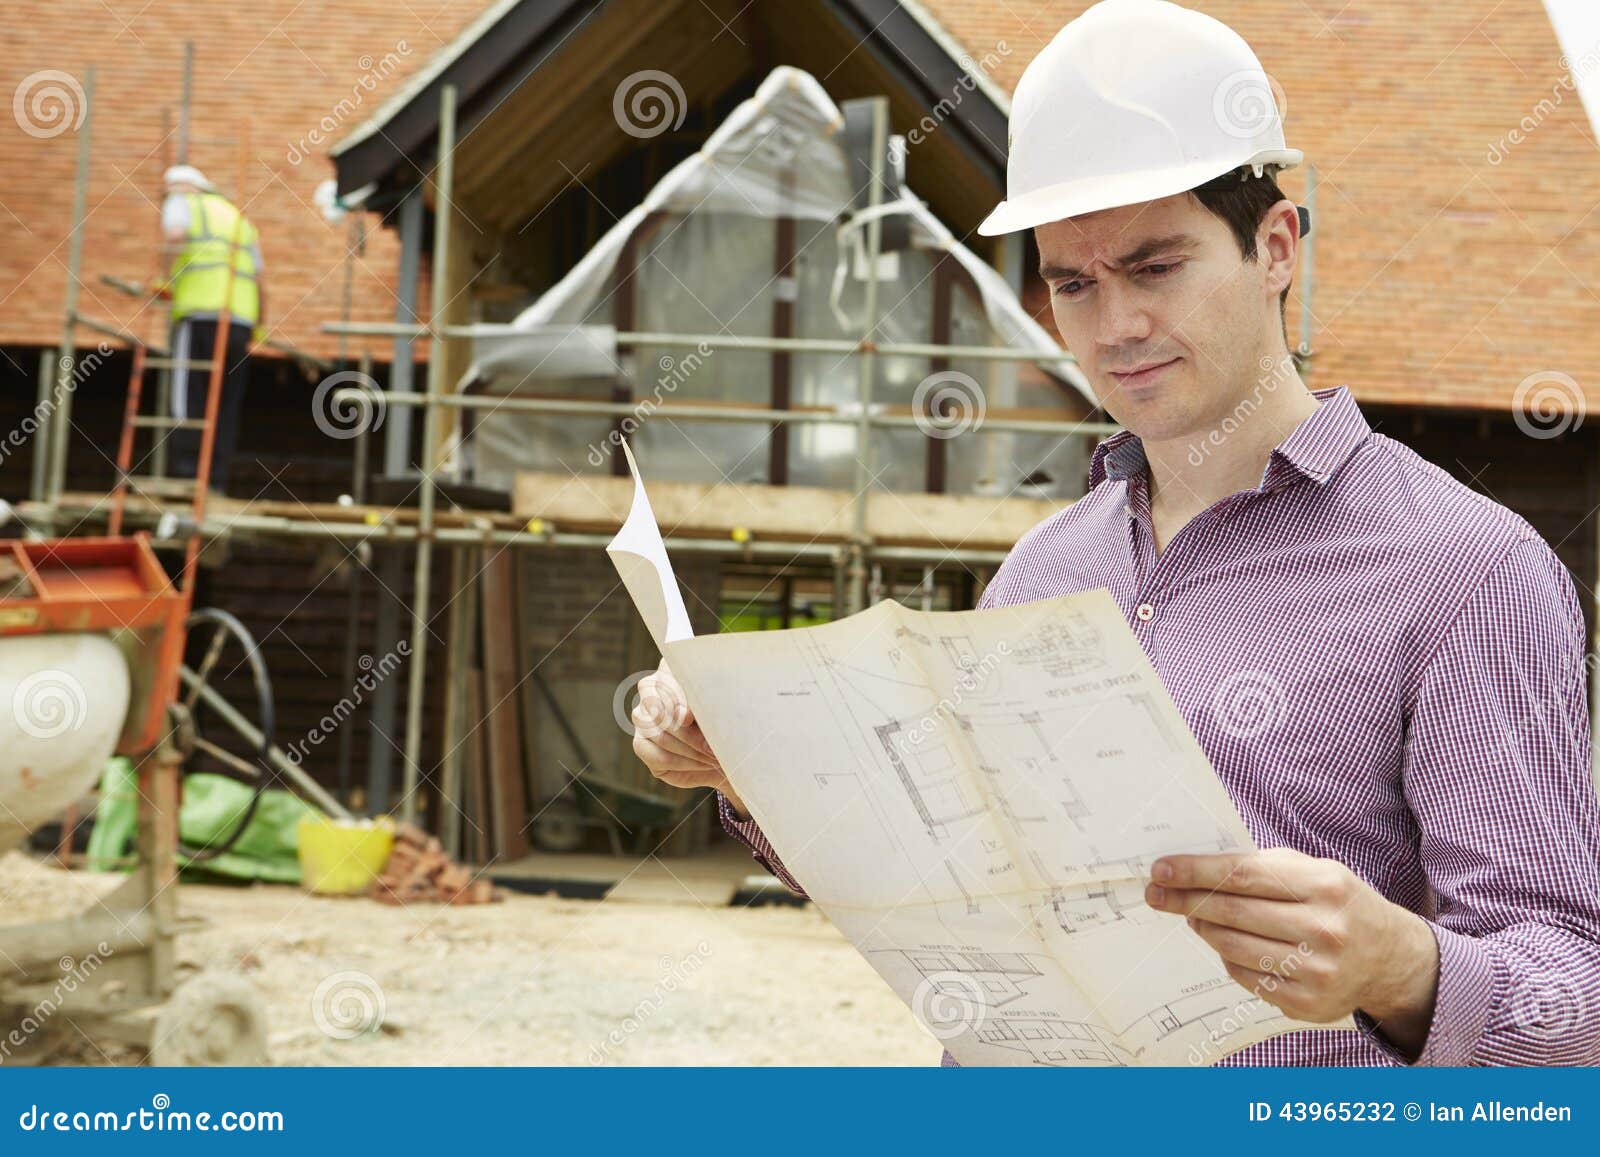 architect on building site looking at house plans